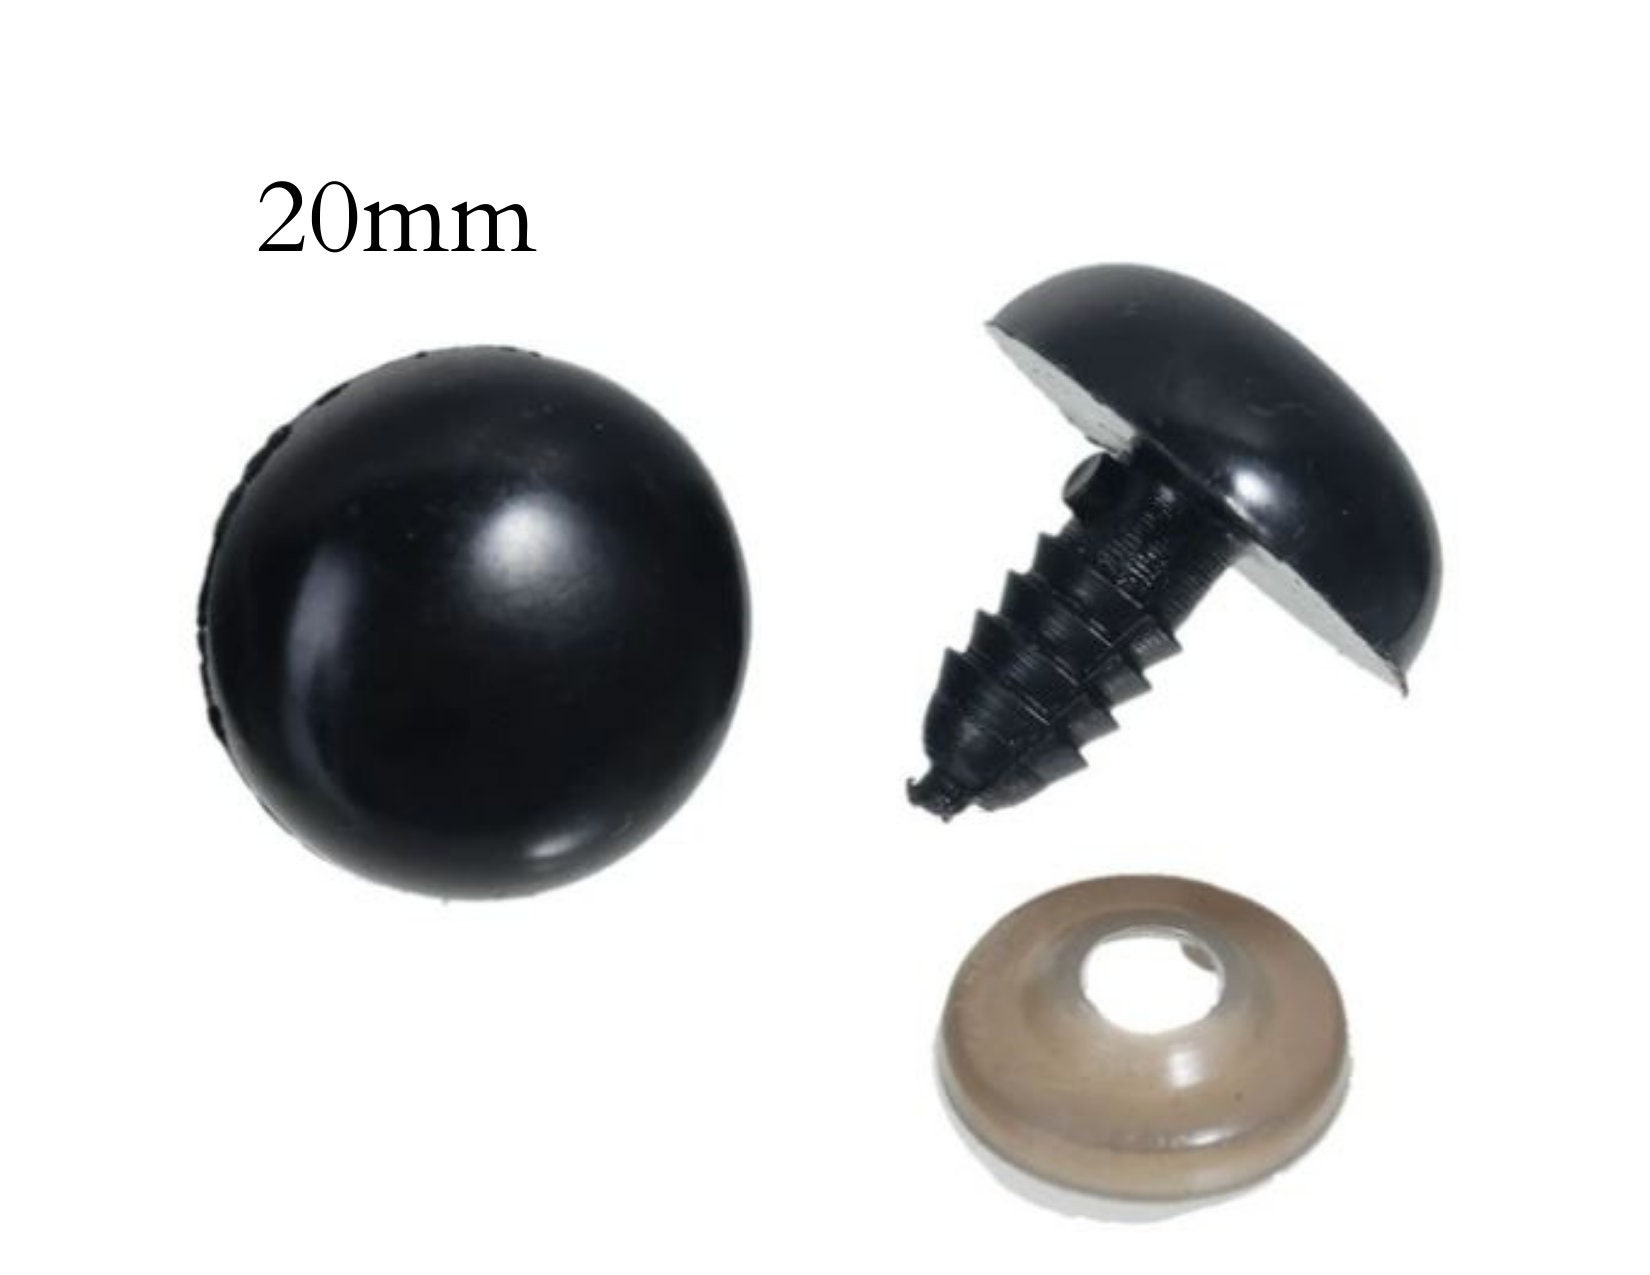 BLACK Safety Eyes, Available in 14 Different Sizes 4.5mm to 24mm